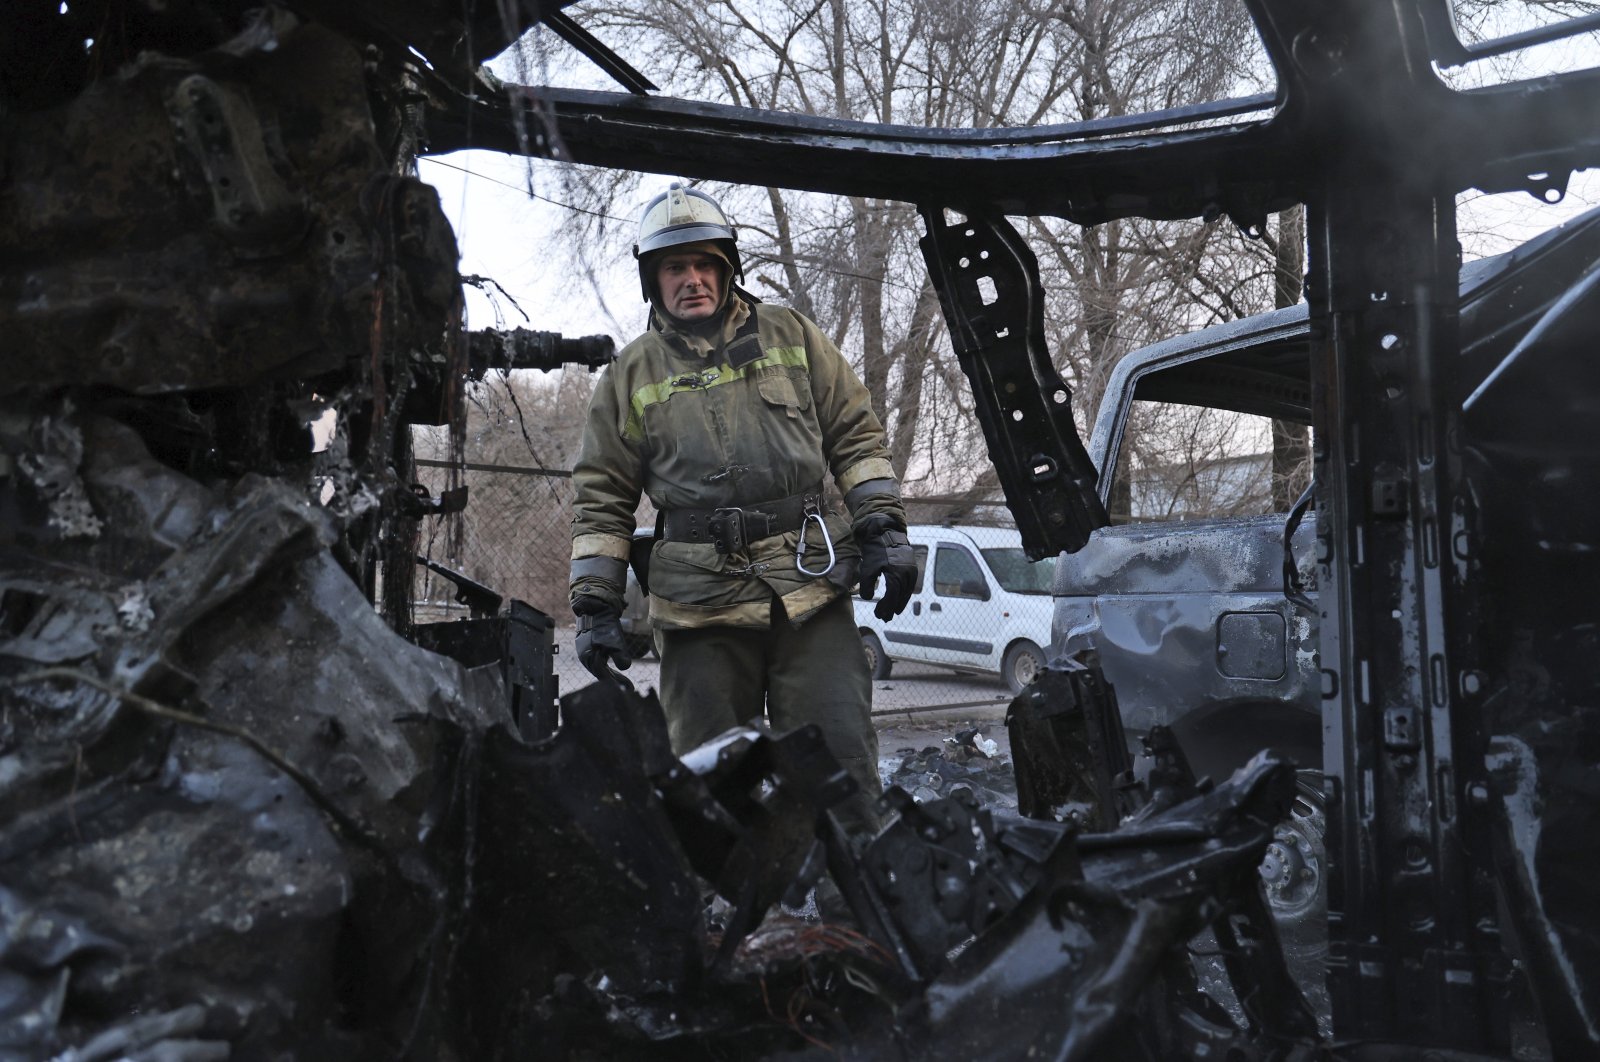 A firefighter examines a burned car after what Russian officials in Donetsk said was a shelling by Ukrainian forces, in Donetsk, eastern Ukraine, Dec. 15, 2022. (AP Photo)